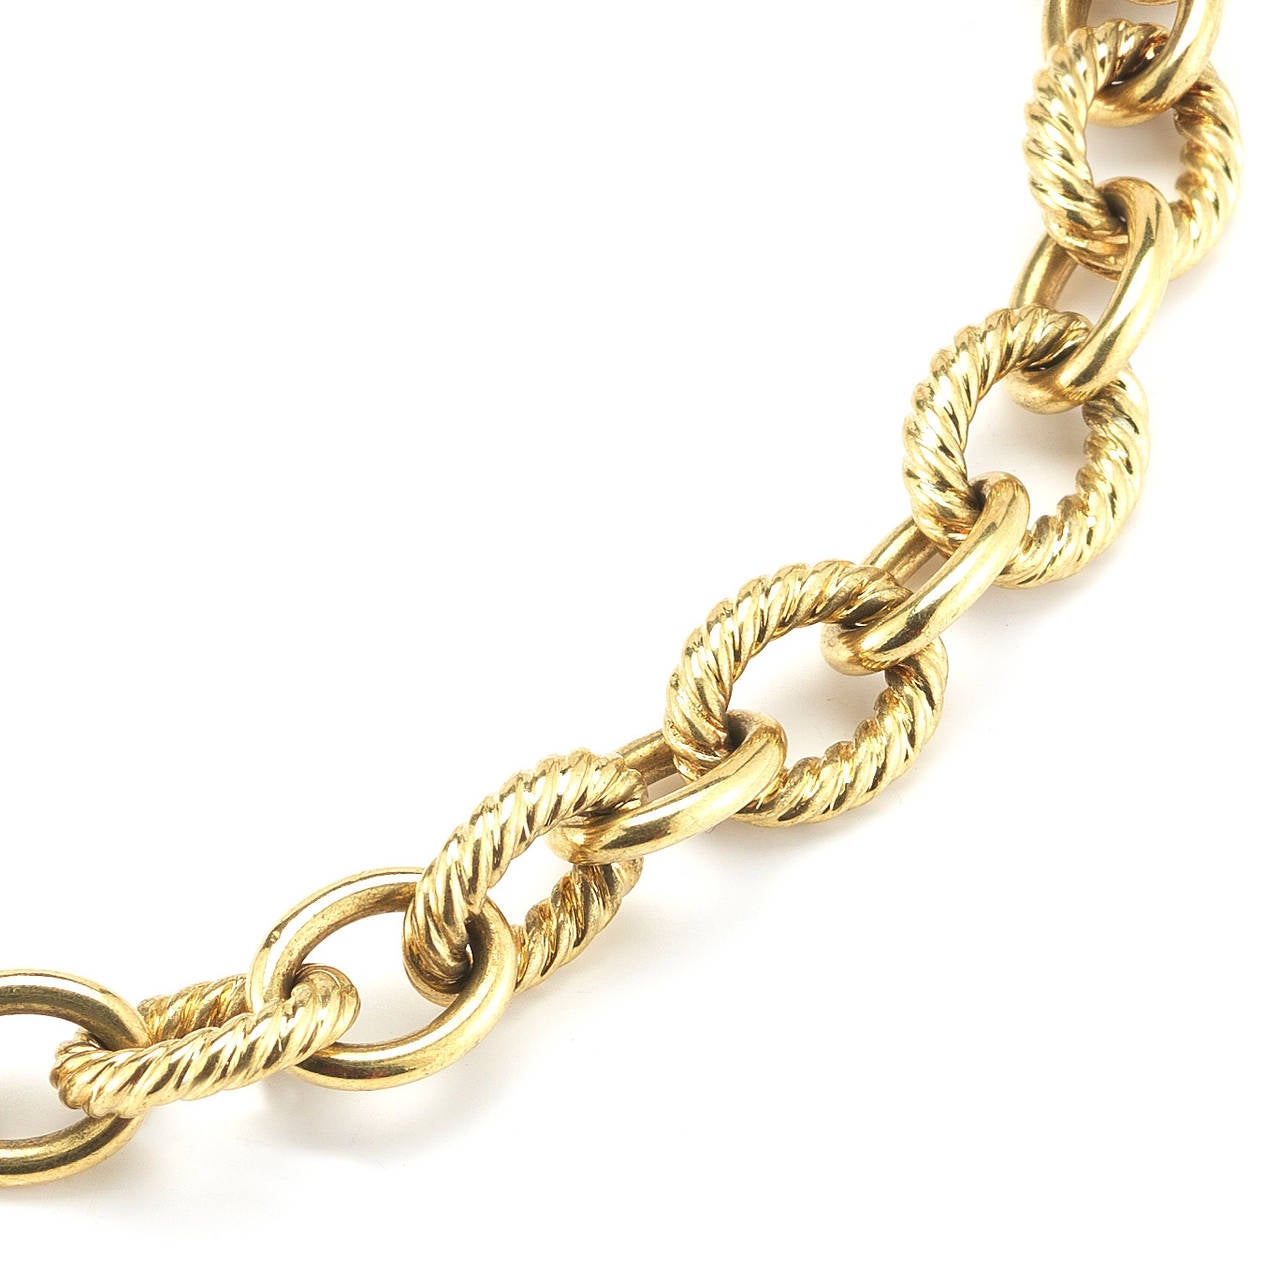 The transformation of simple chains into works of striking jewelry speaks to the artful eye and skillful hand of David Yurman.  A simple box chain is finessed into a sensual strand of soft corners and edges.  In the wheat chain, metal is carefully